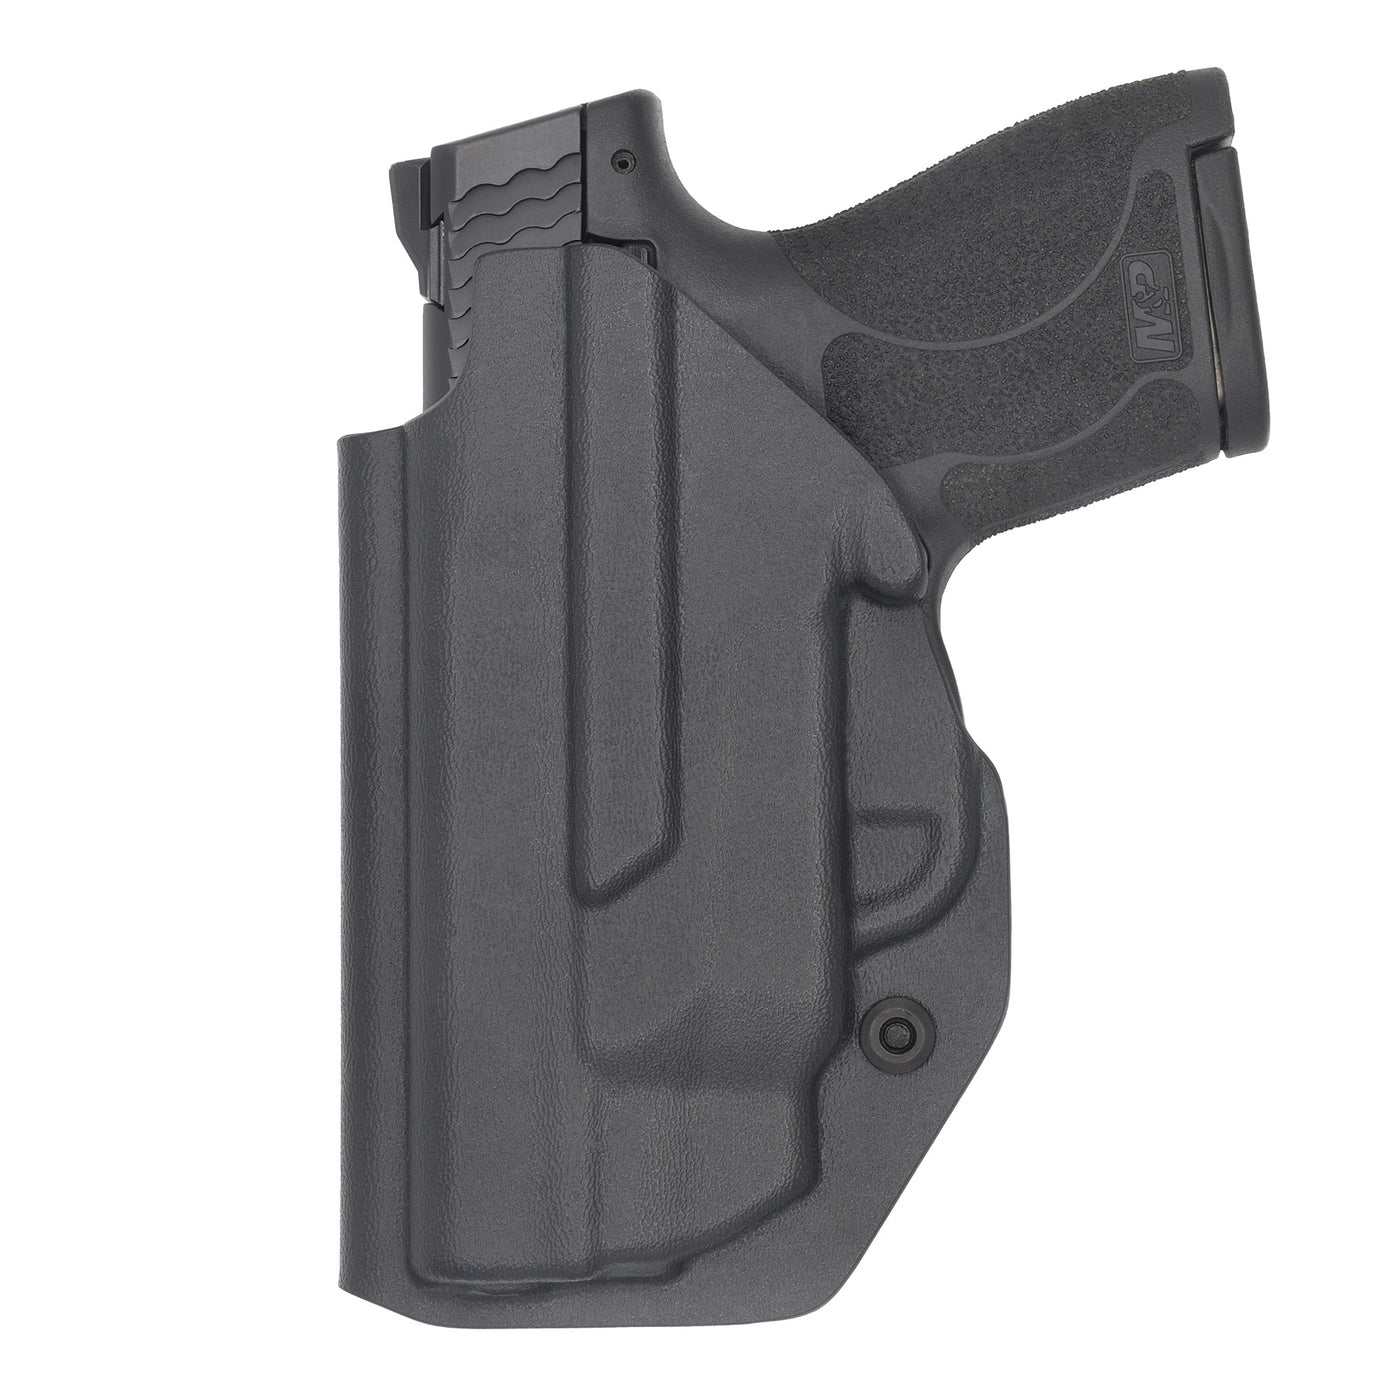 C&G Holsters IWB inside the waistband Tactical Holster for the M&P Shield with Laser rear view